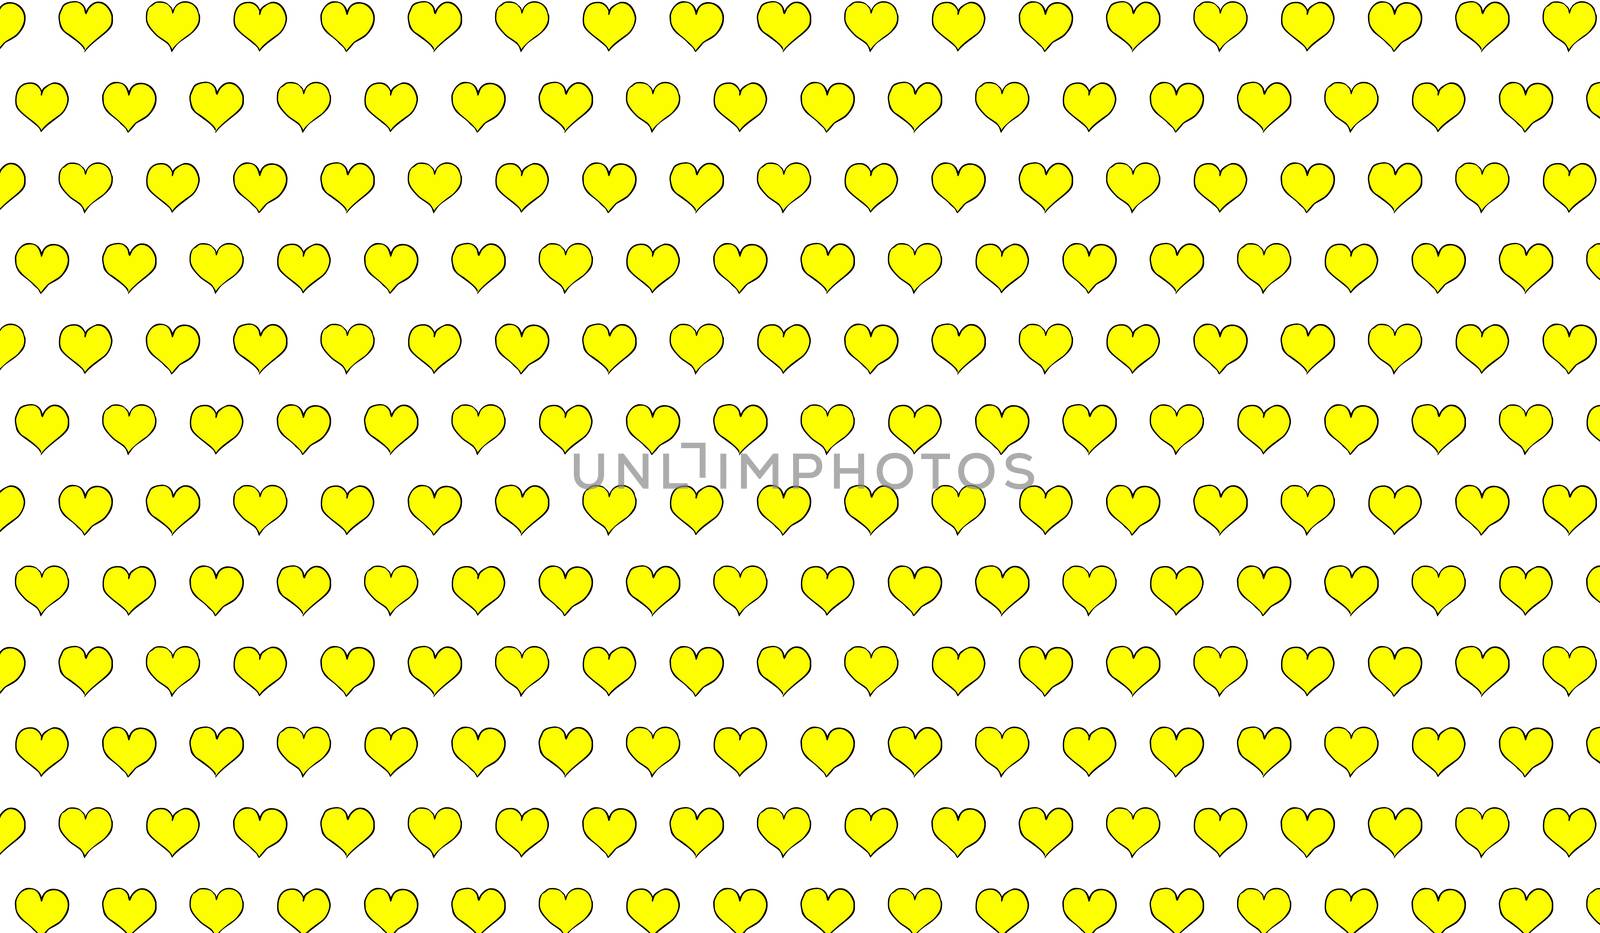 2d yellow pattern of cartoon hearts on isolated background by Andreajk3